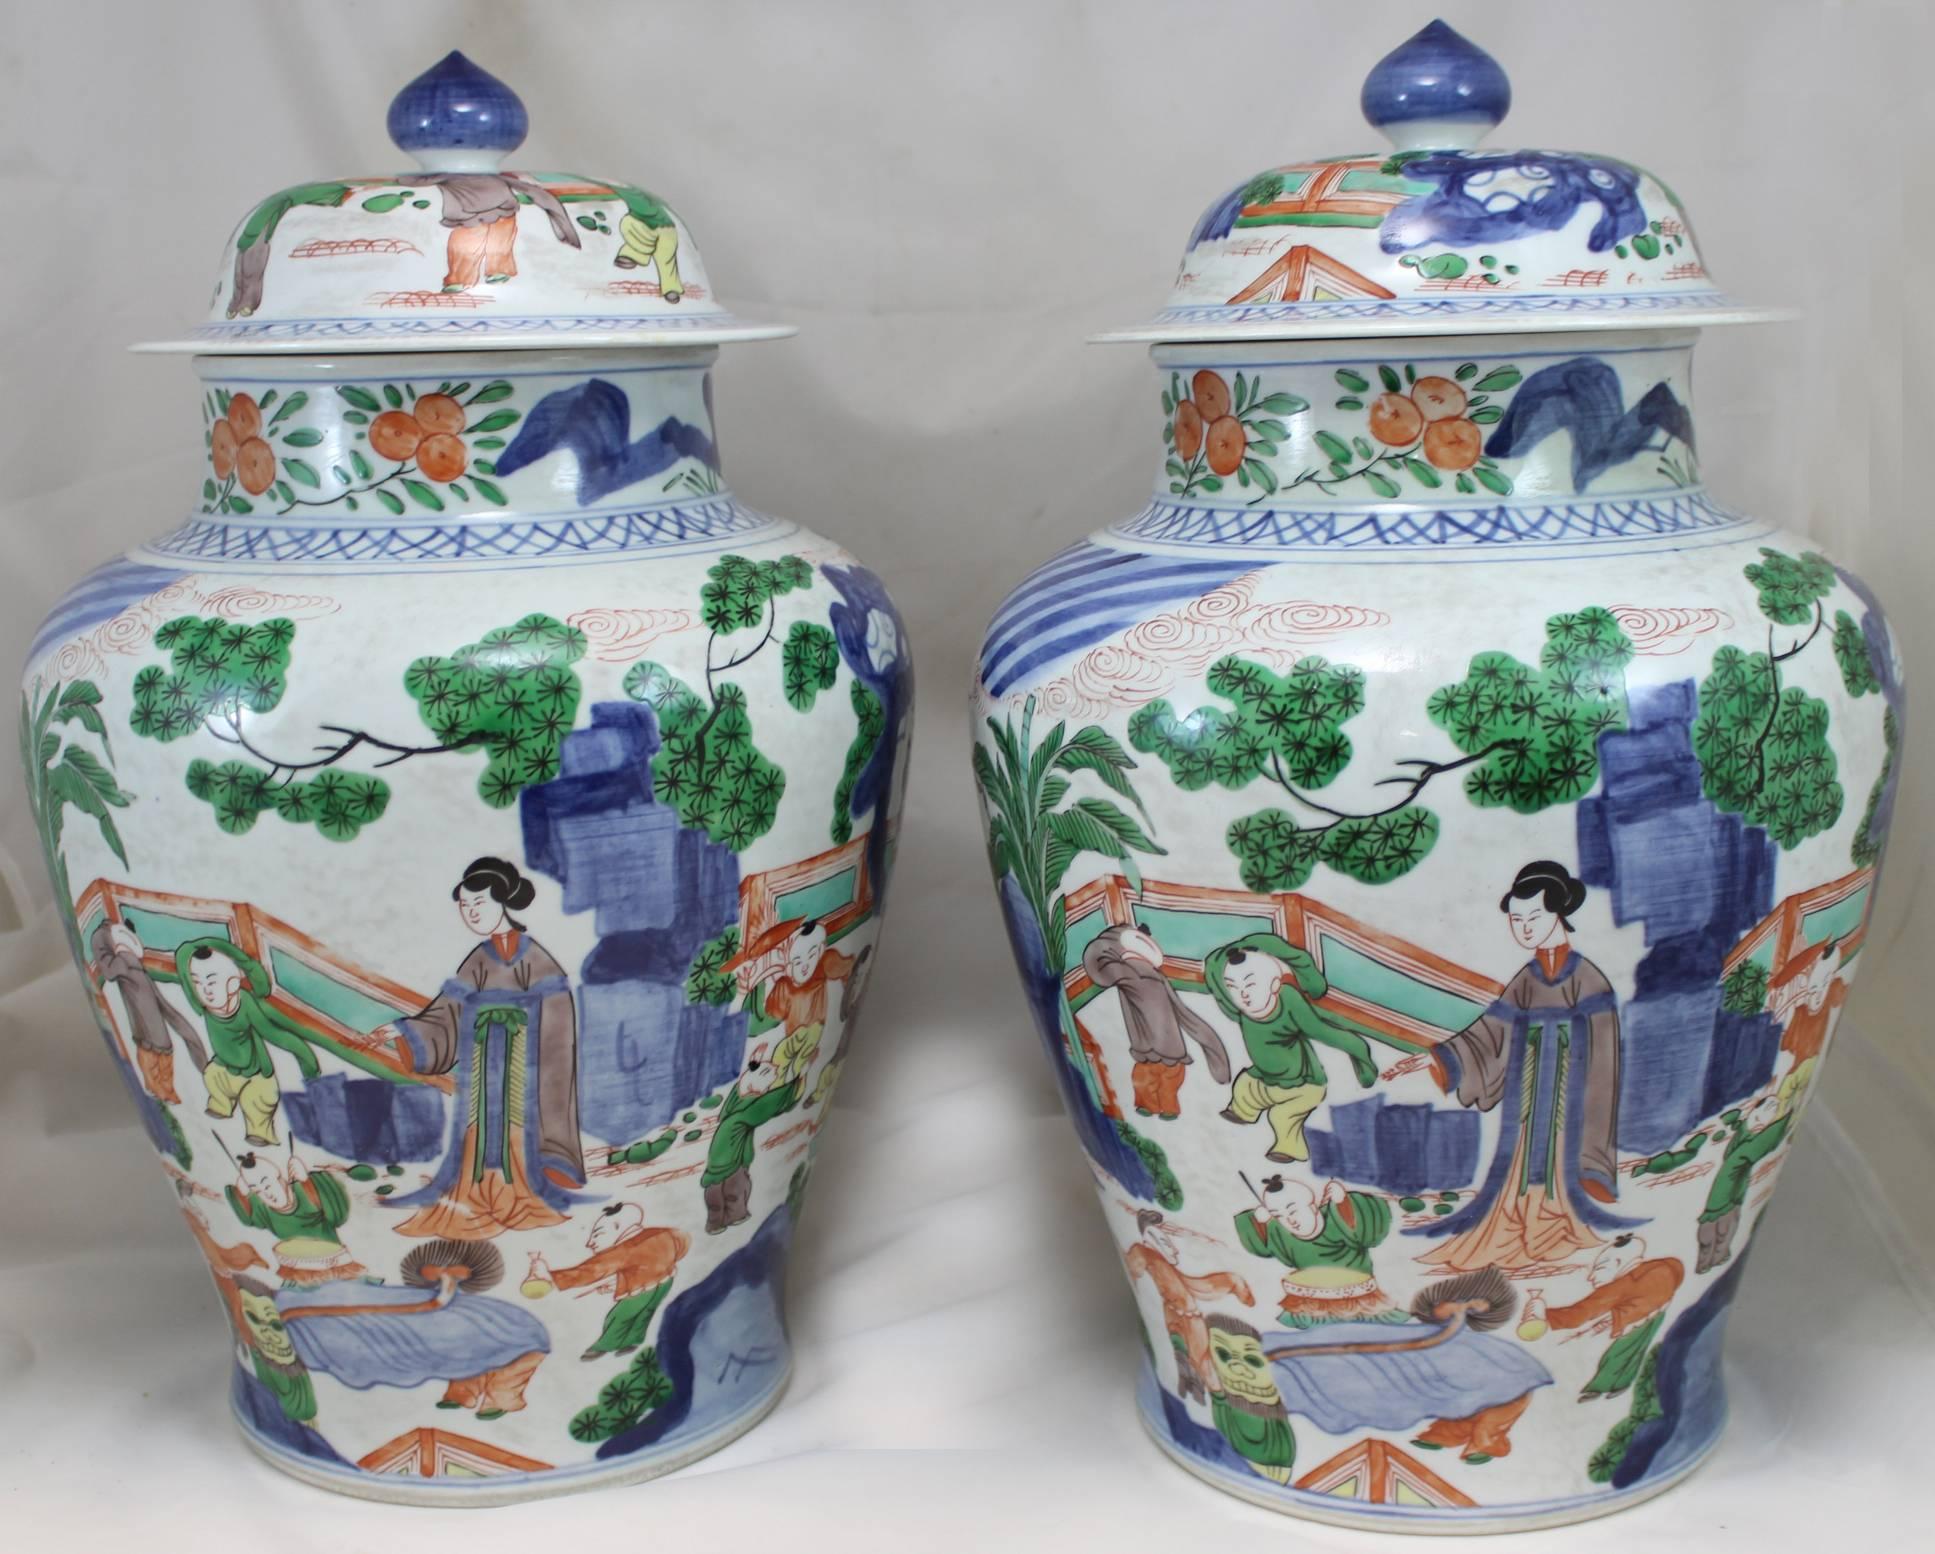 Hand-Painted Pair of 19th Century Chinese Qing Dynasty Polychrome Covered Porcelain Jars